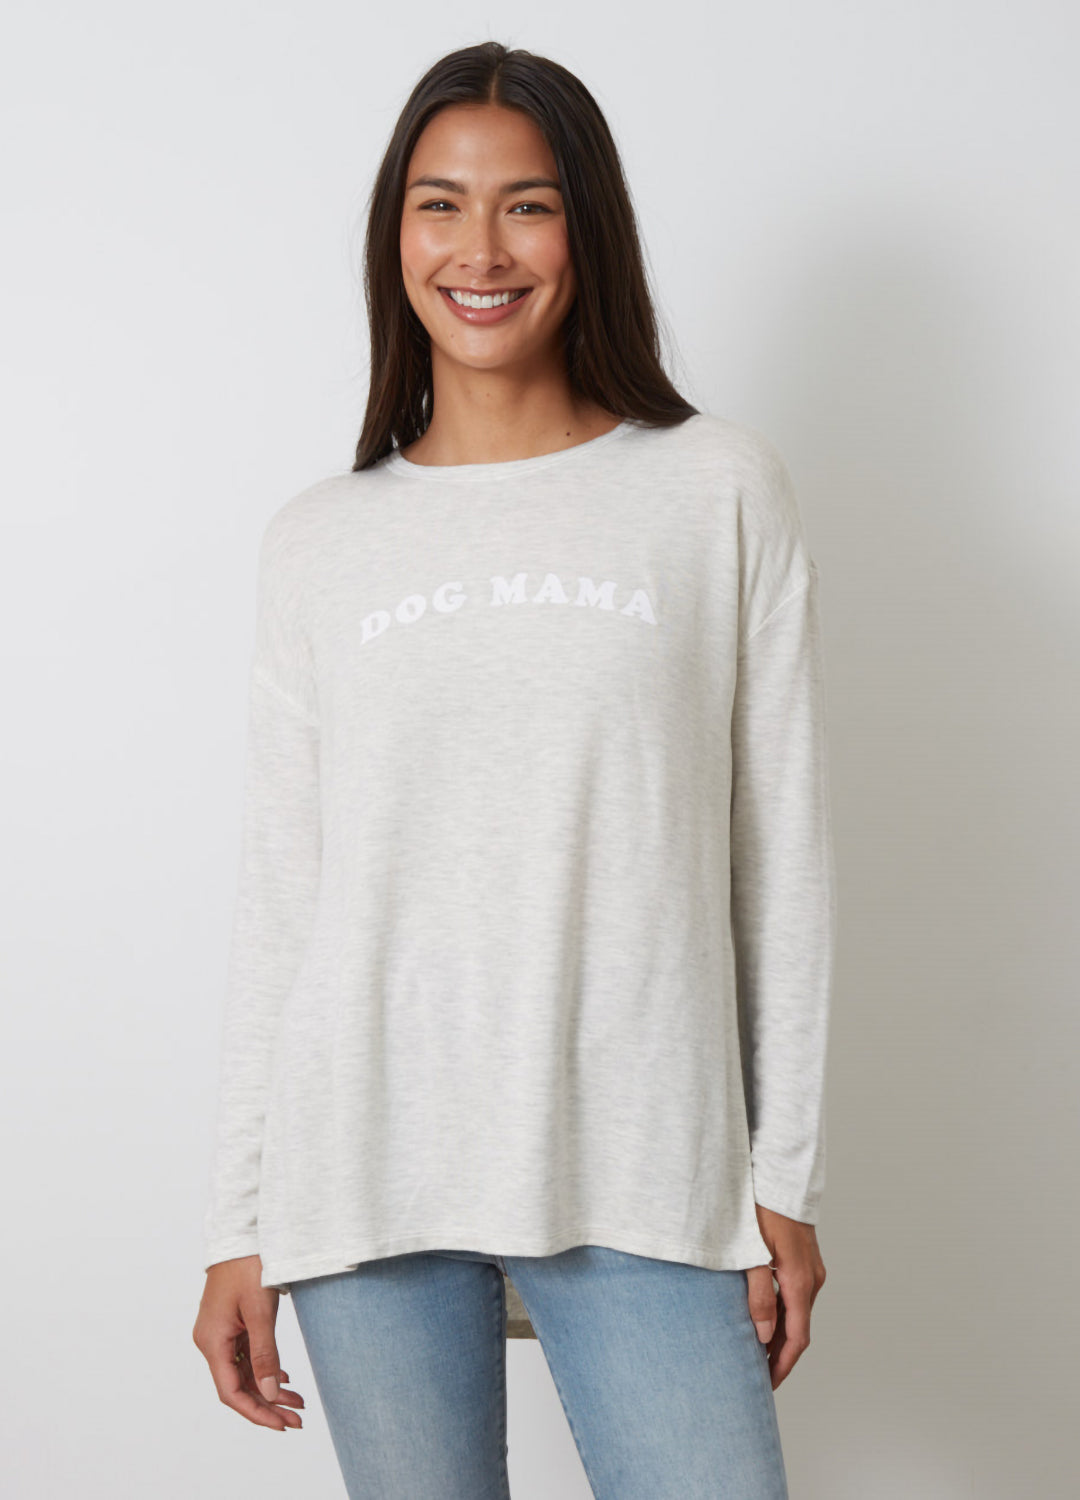 good hYOUman 'The Shauna' sweatshirt top in light grey heather colour with 'Dog Mama' lettering design in white at Inner Beach Co, Toronto, Ontario, Canada